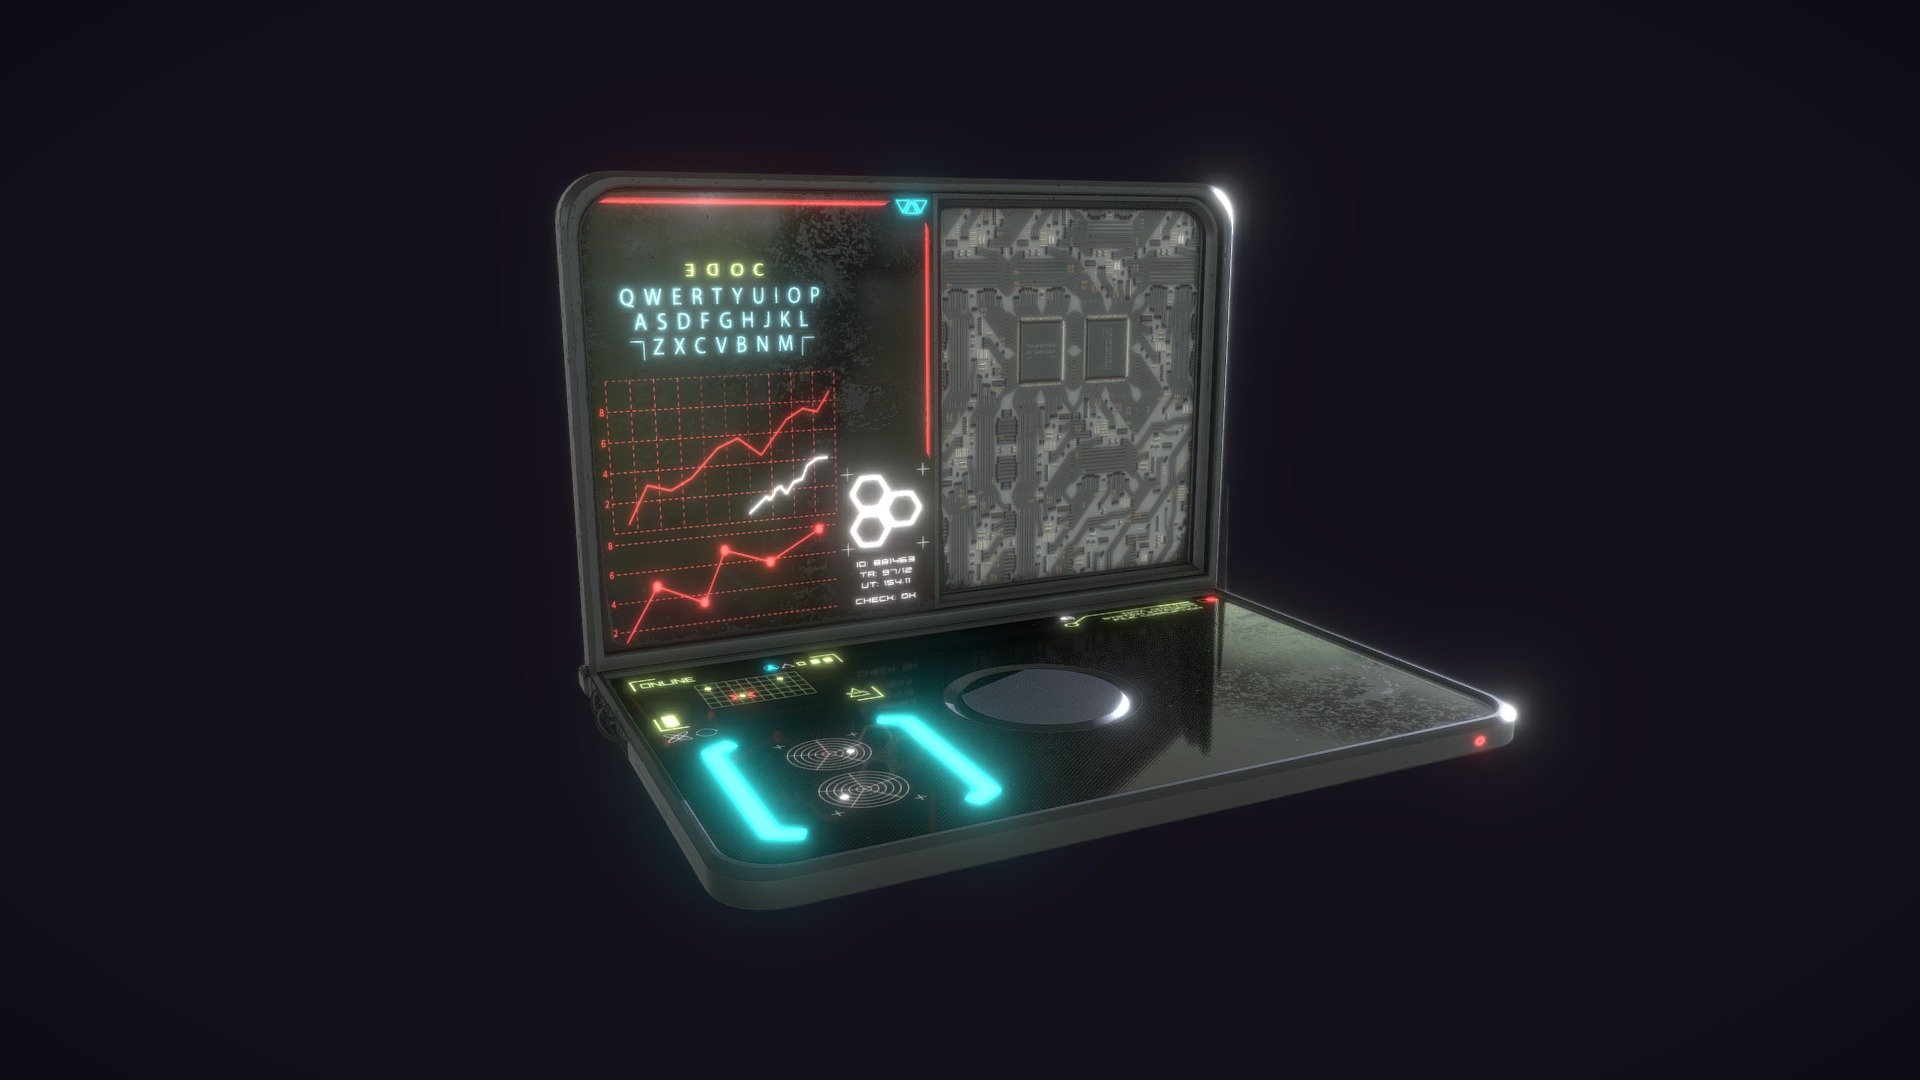 Just a Simple futuristic minimalistic military laptop computer with exposed interior components.



Without the wires and antenna 1,168 Vert - 2,266 Tri



1 Set 4K PBR Mats
The wires and antenna dont have a material set. They were extra objects i decided to add late after already texturing the laptop. 



(Free) Laptop Model #2 - https://sketchfab.com/3d-models/sci-fi-laptop-low-poly-2-5b4c6b94692643d9ad0ba61dcb4892dc


Game ready Laptop Asset - https://sketchfab.com/3d-models/laptop-game-ready-low-poly-ddcd0efcc29d490e882bbaf61a3a0bfc
Some of the Emmissive Decals are by: Sanctus_Art Free Decal Pack
 - Sci-Fi Minimalist Laptop - Buy Royalty Free 3D model by bossdeff 3d model